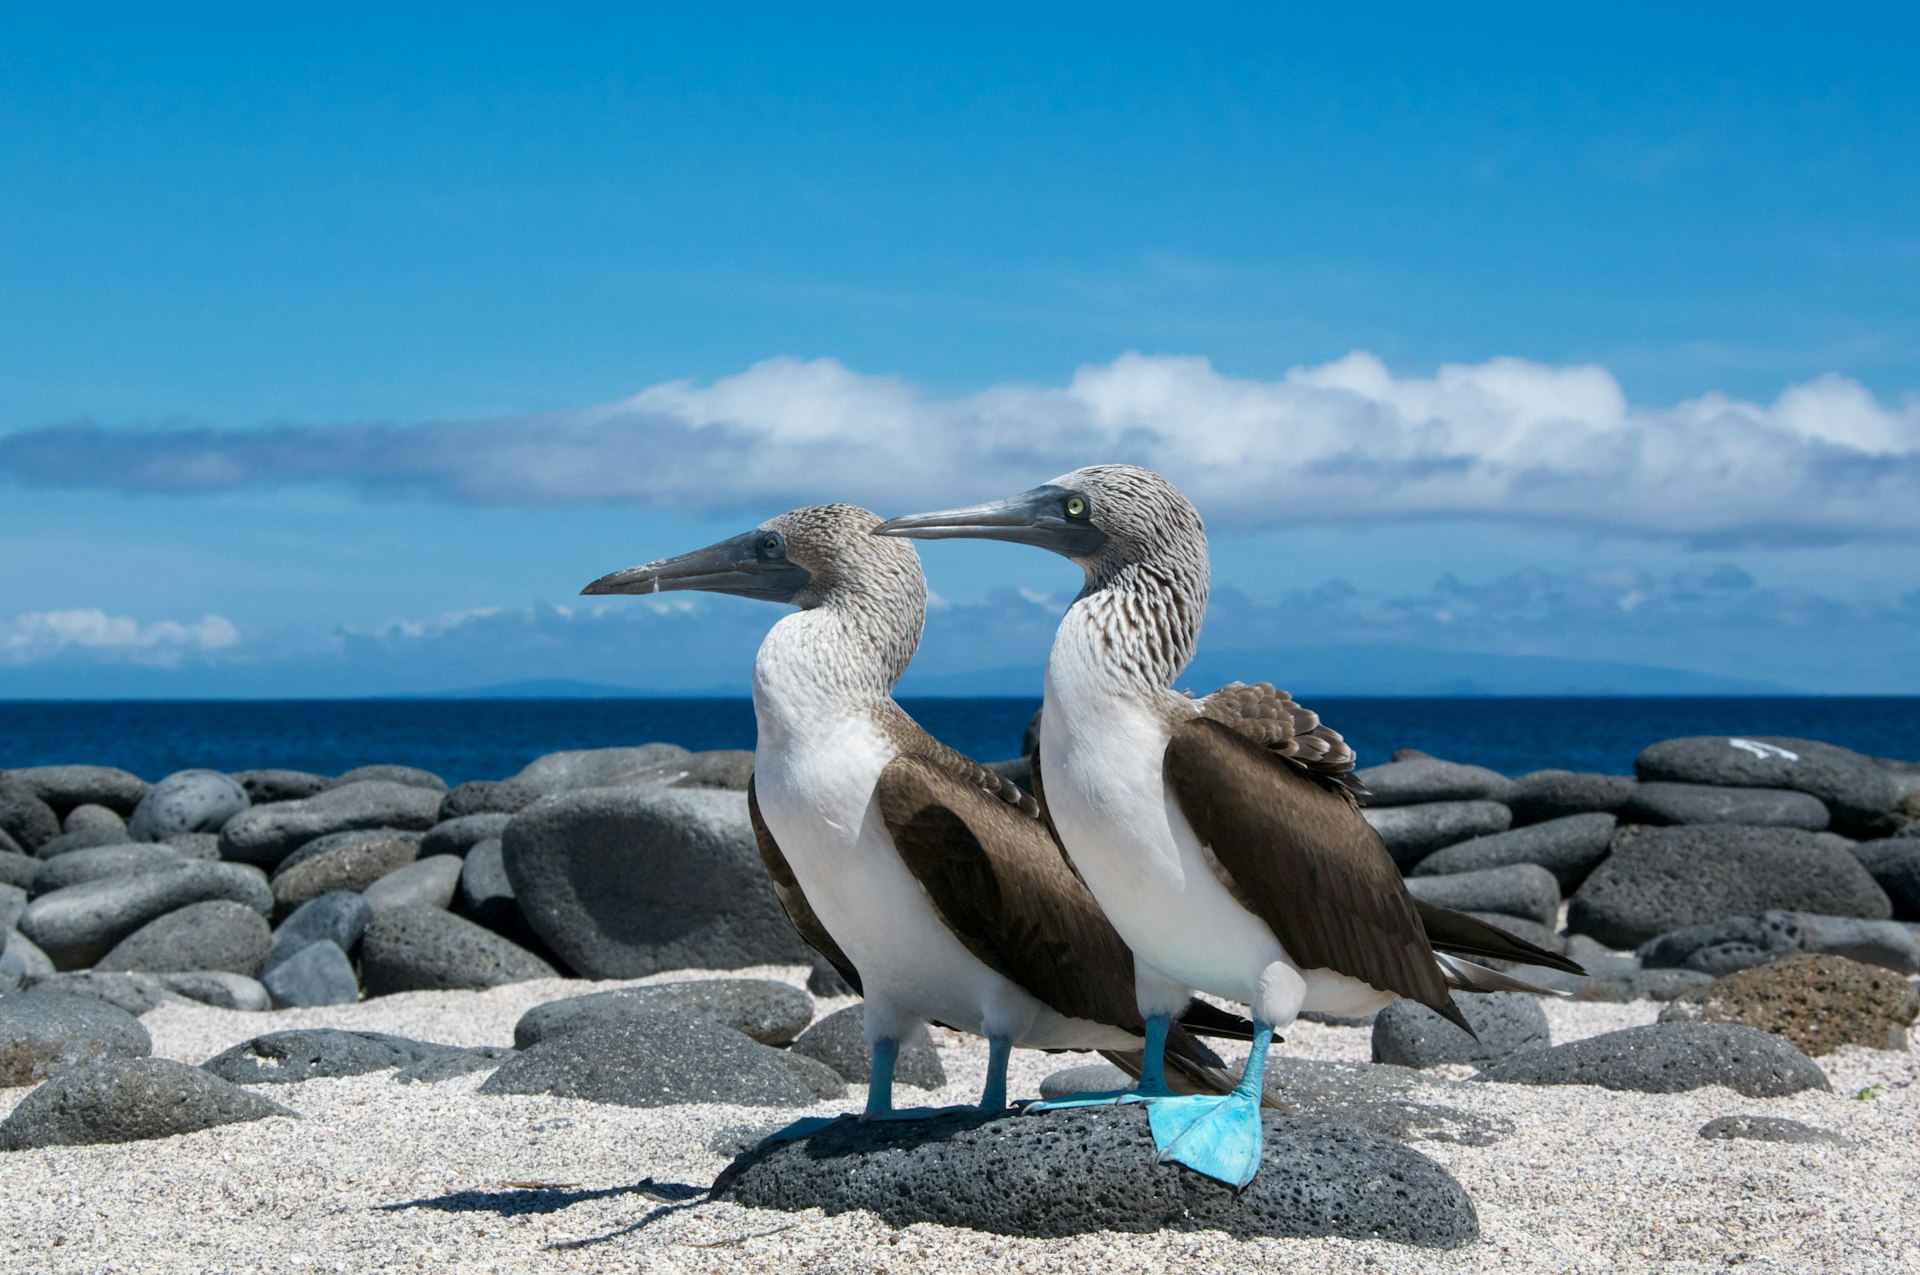 Two large seabirds with blue feet stand on a rocky shore